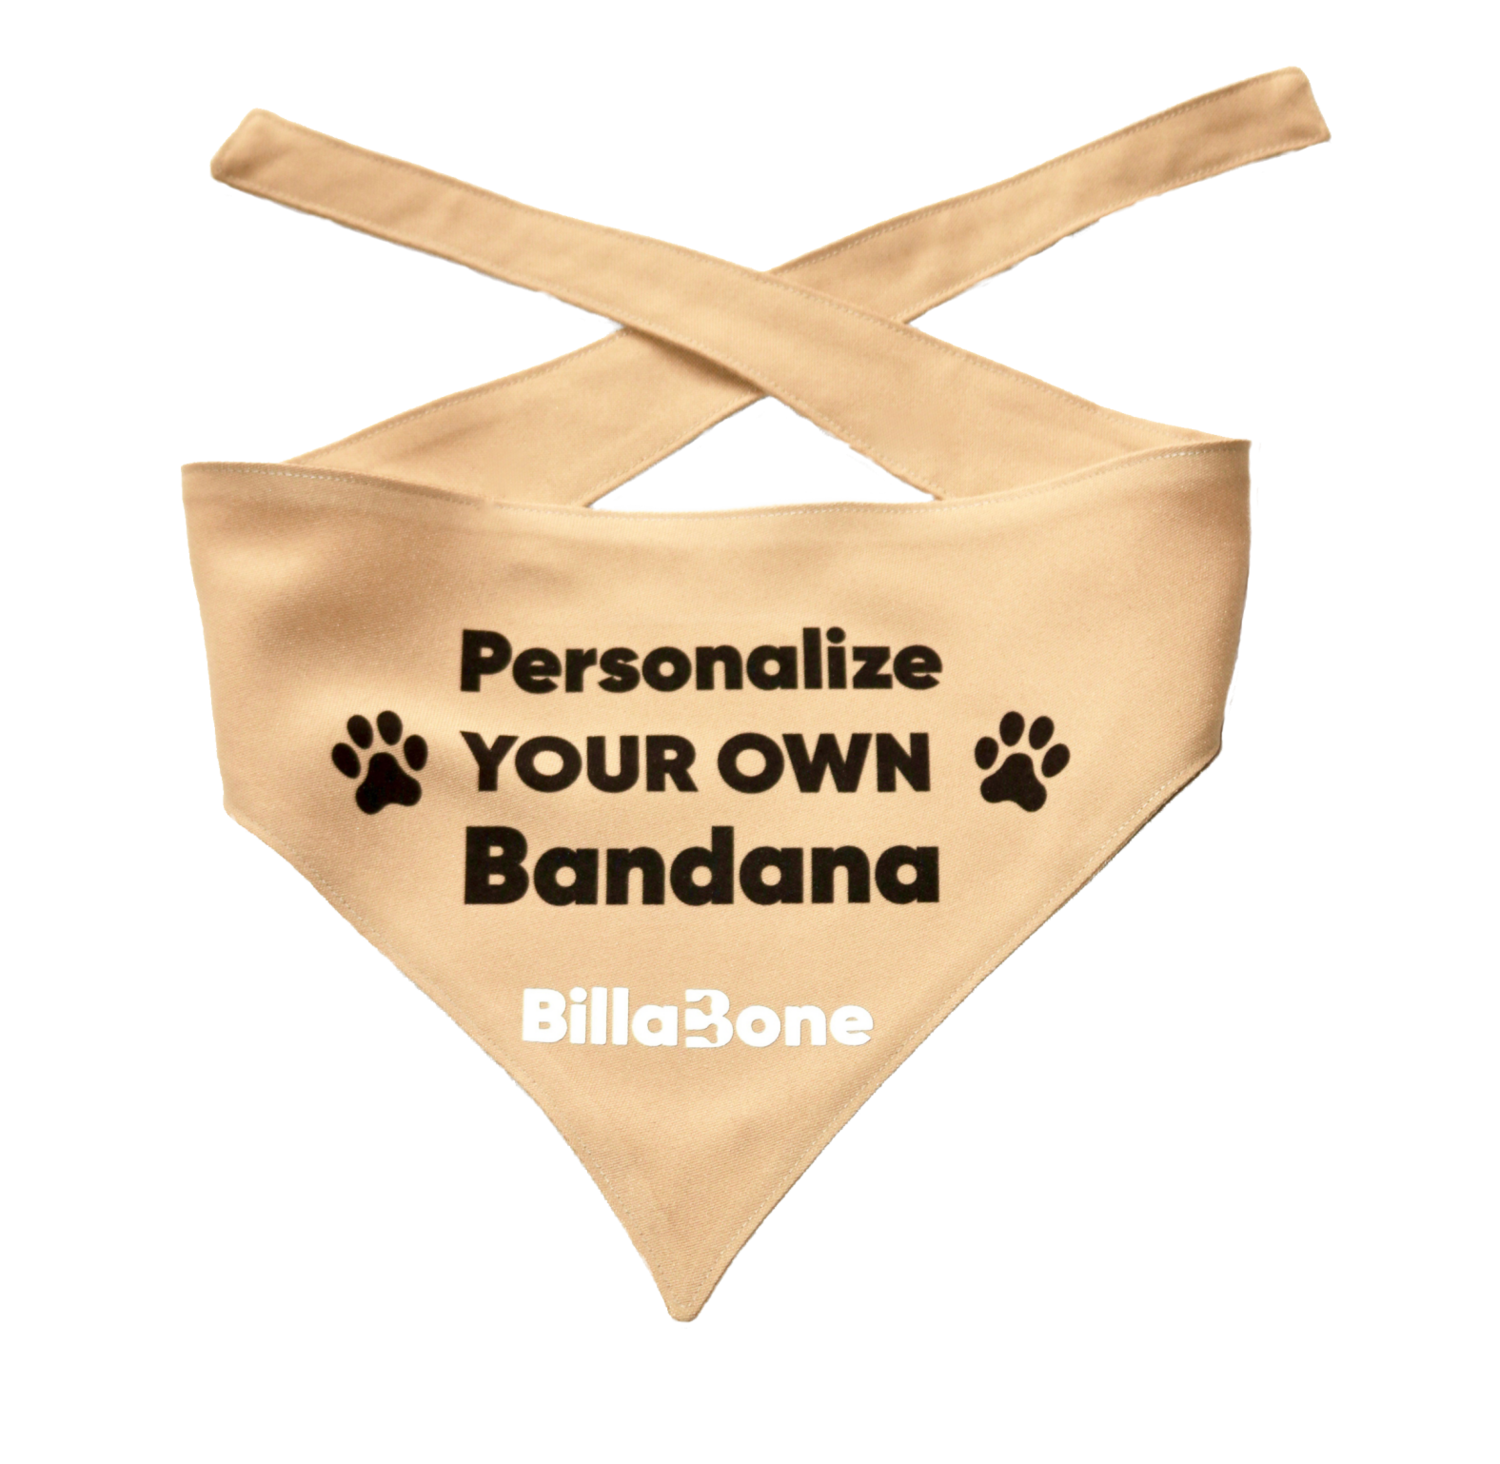 Personalize your own Bandana